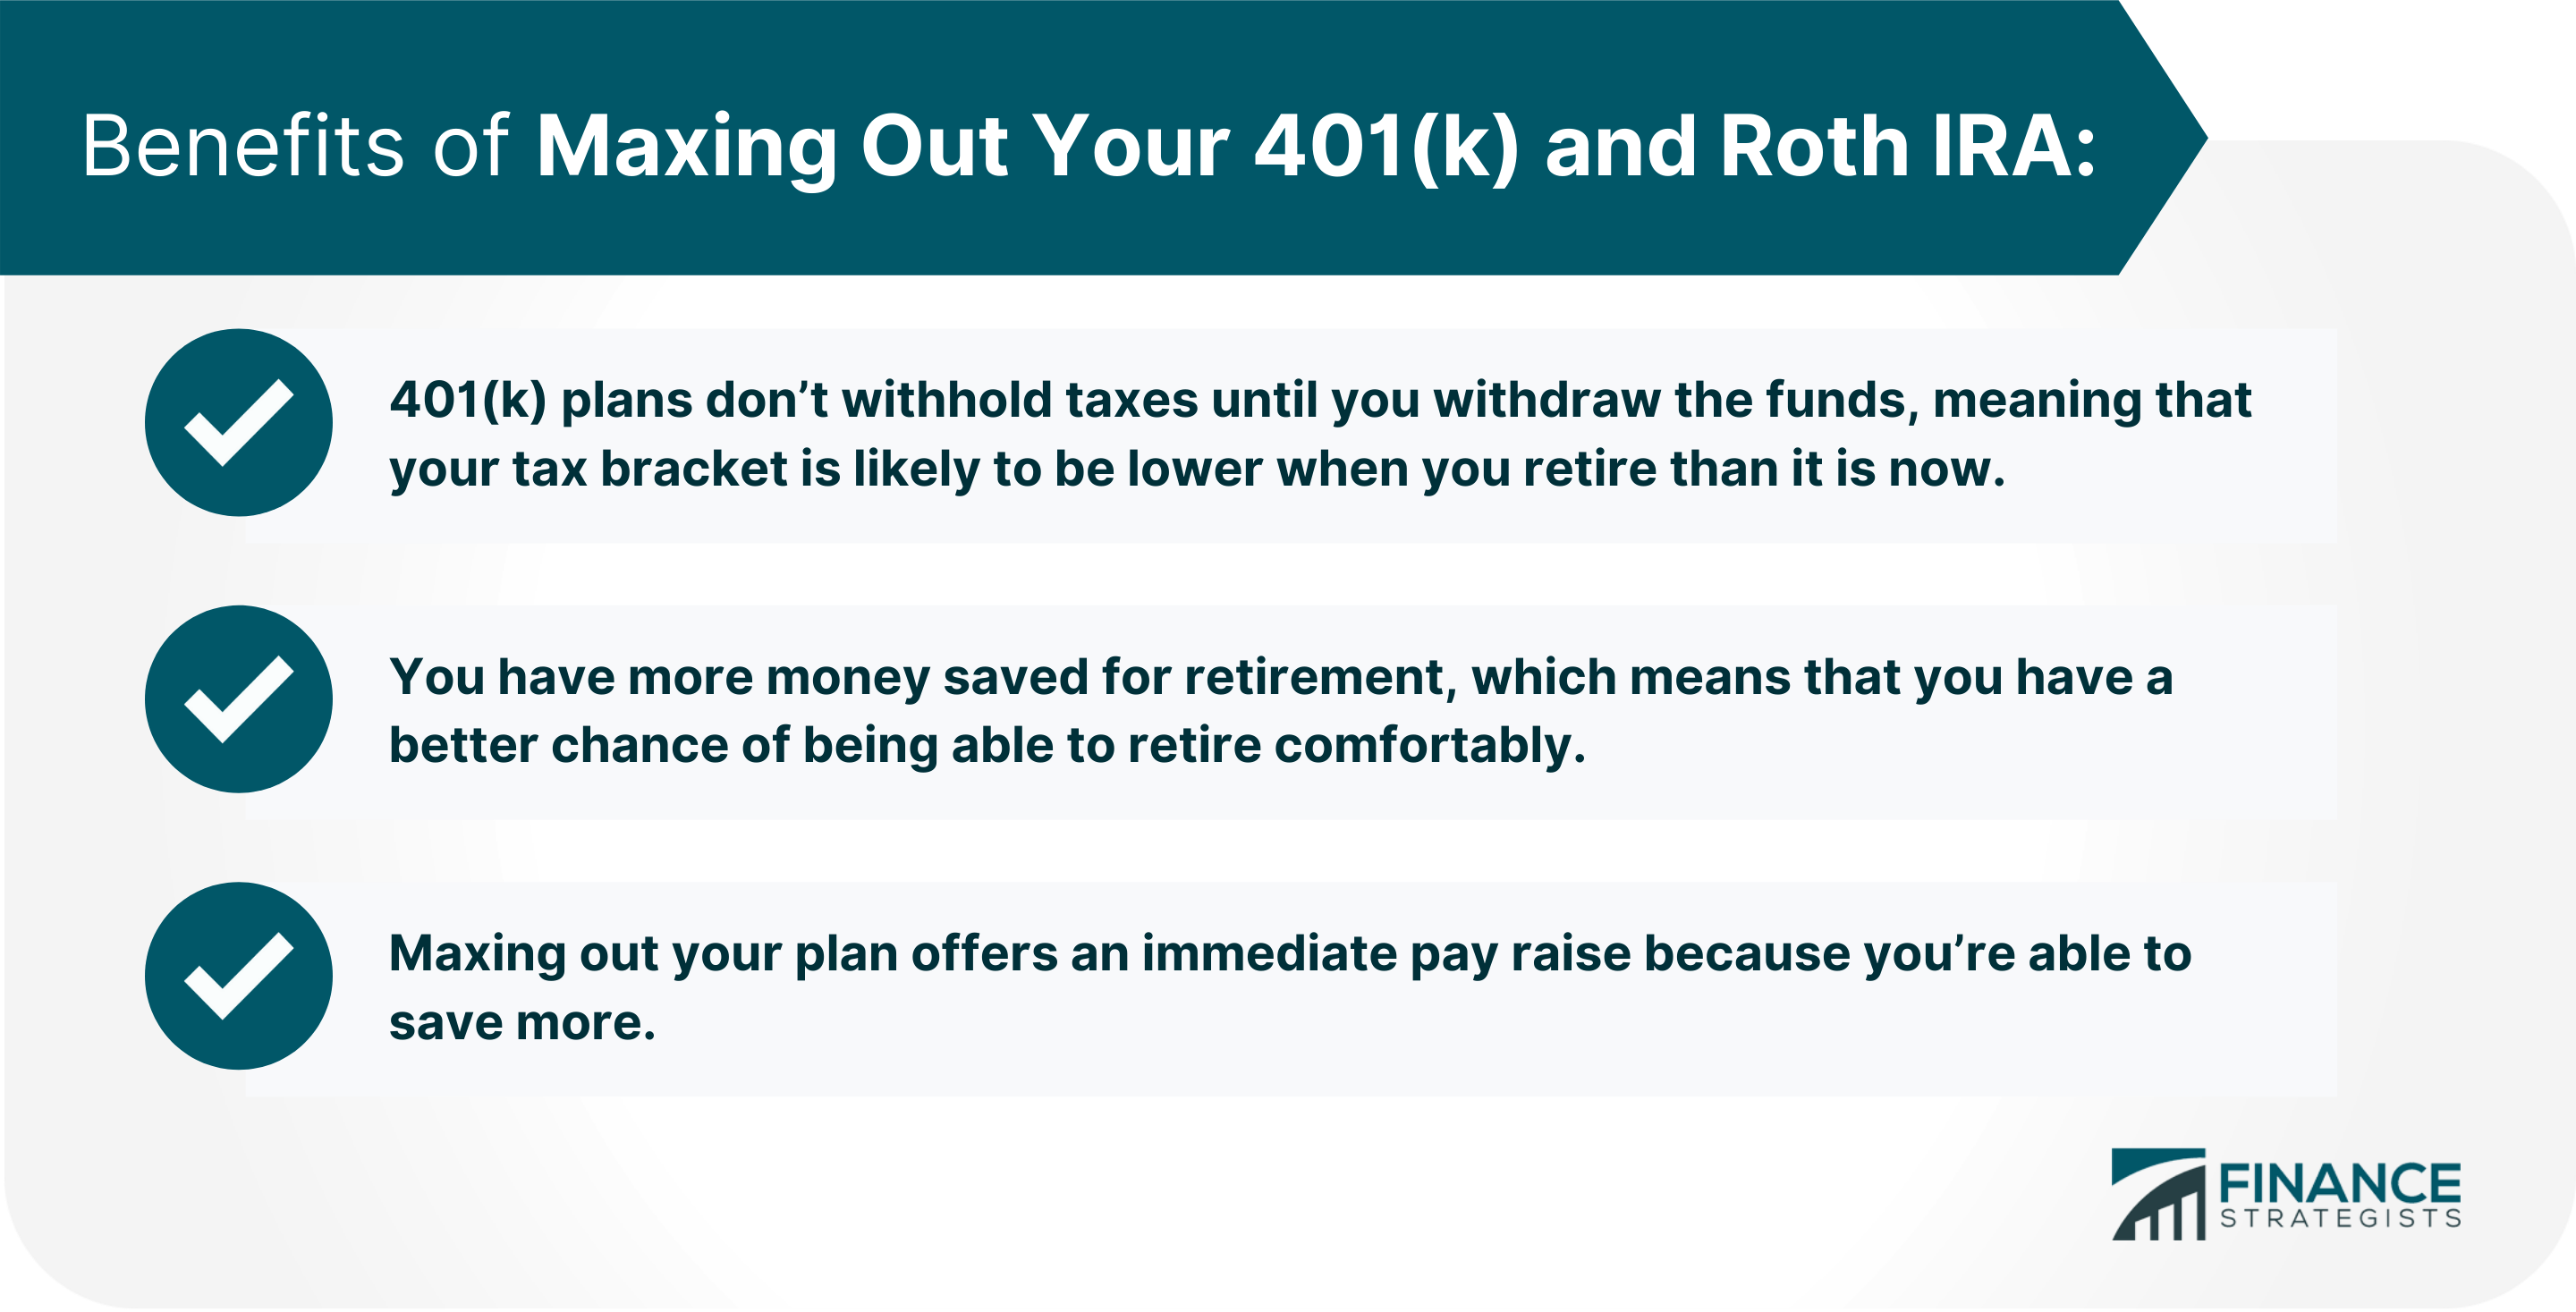 Benefits_of_Maxing_Out_Your_401(k)_and_Roth_IRA